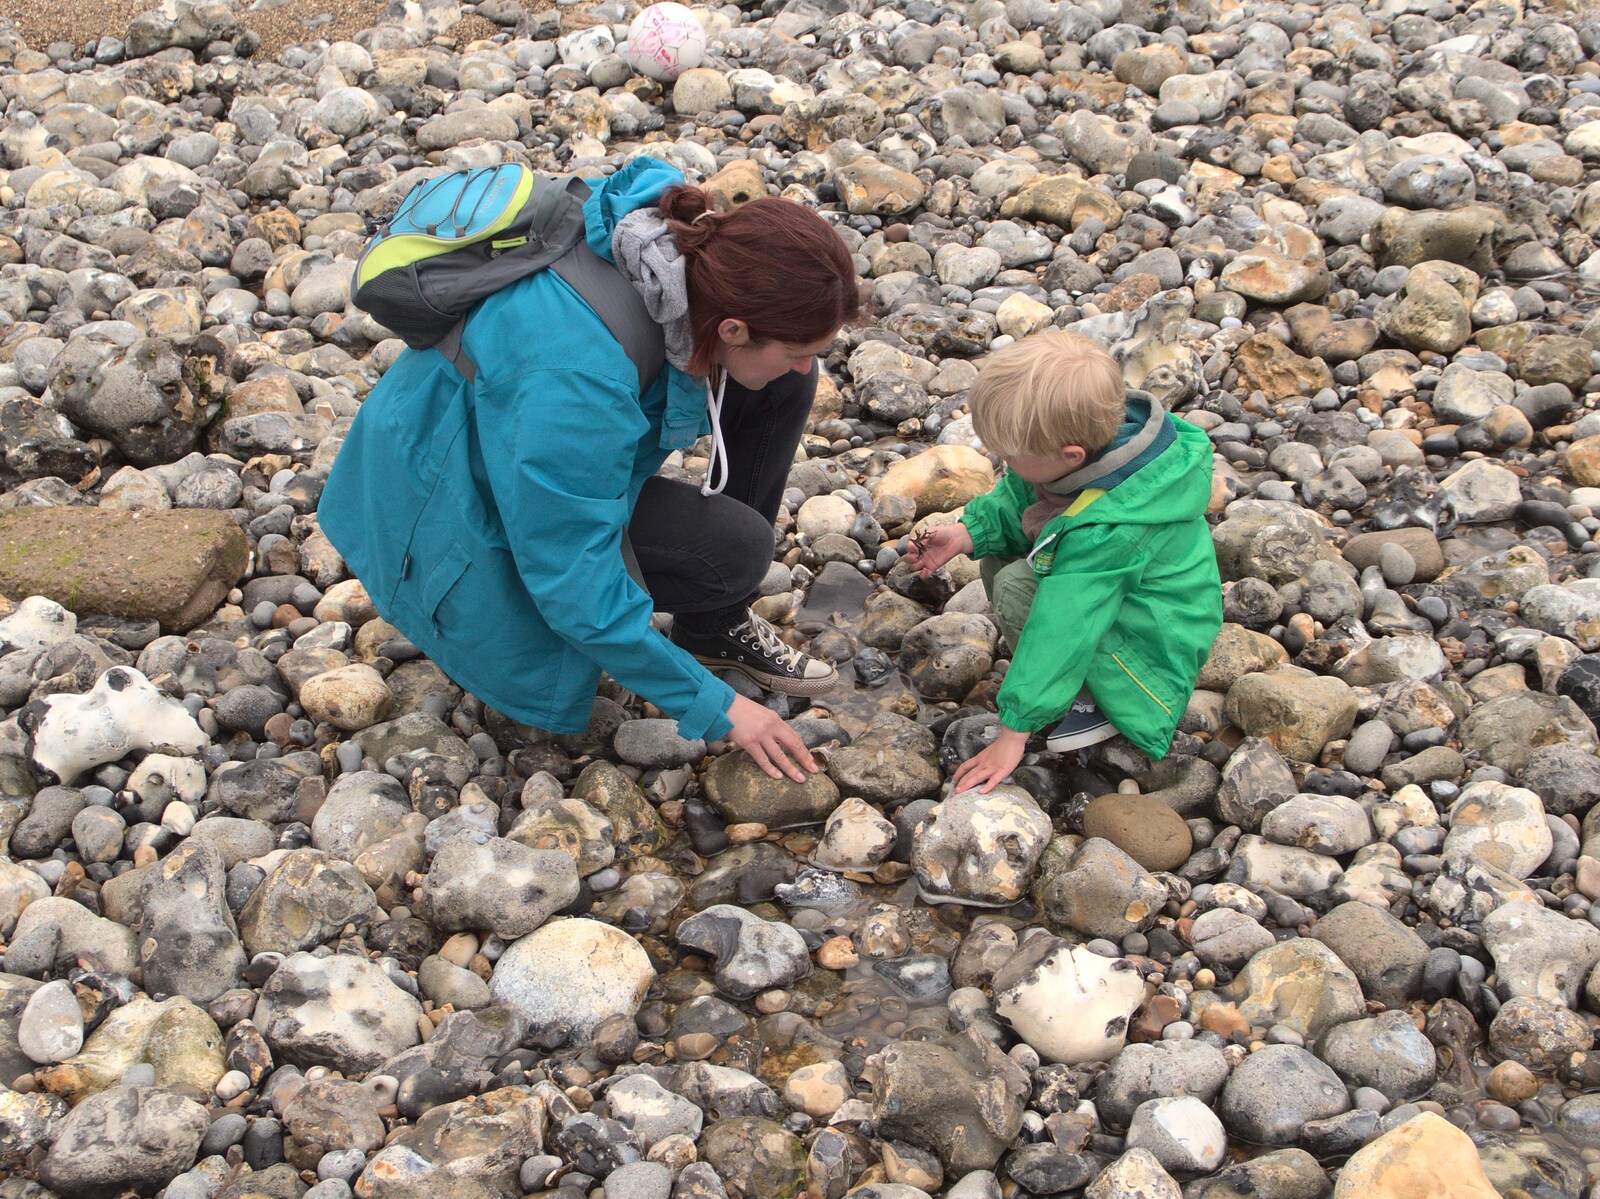 Isobel and Harry on East Runton beach from A Birthday Camping Trip, East Runton, North Norfolk - 26th May 2015